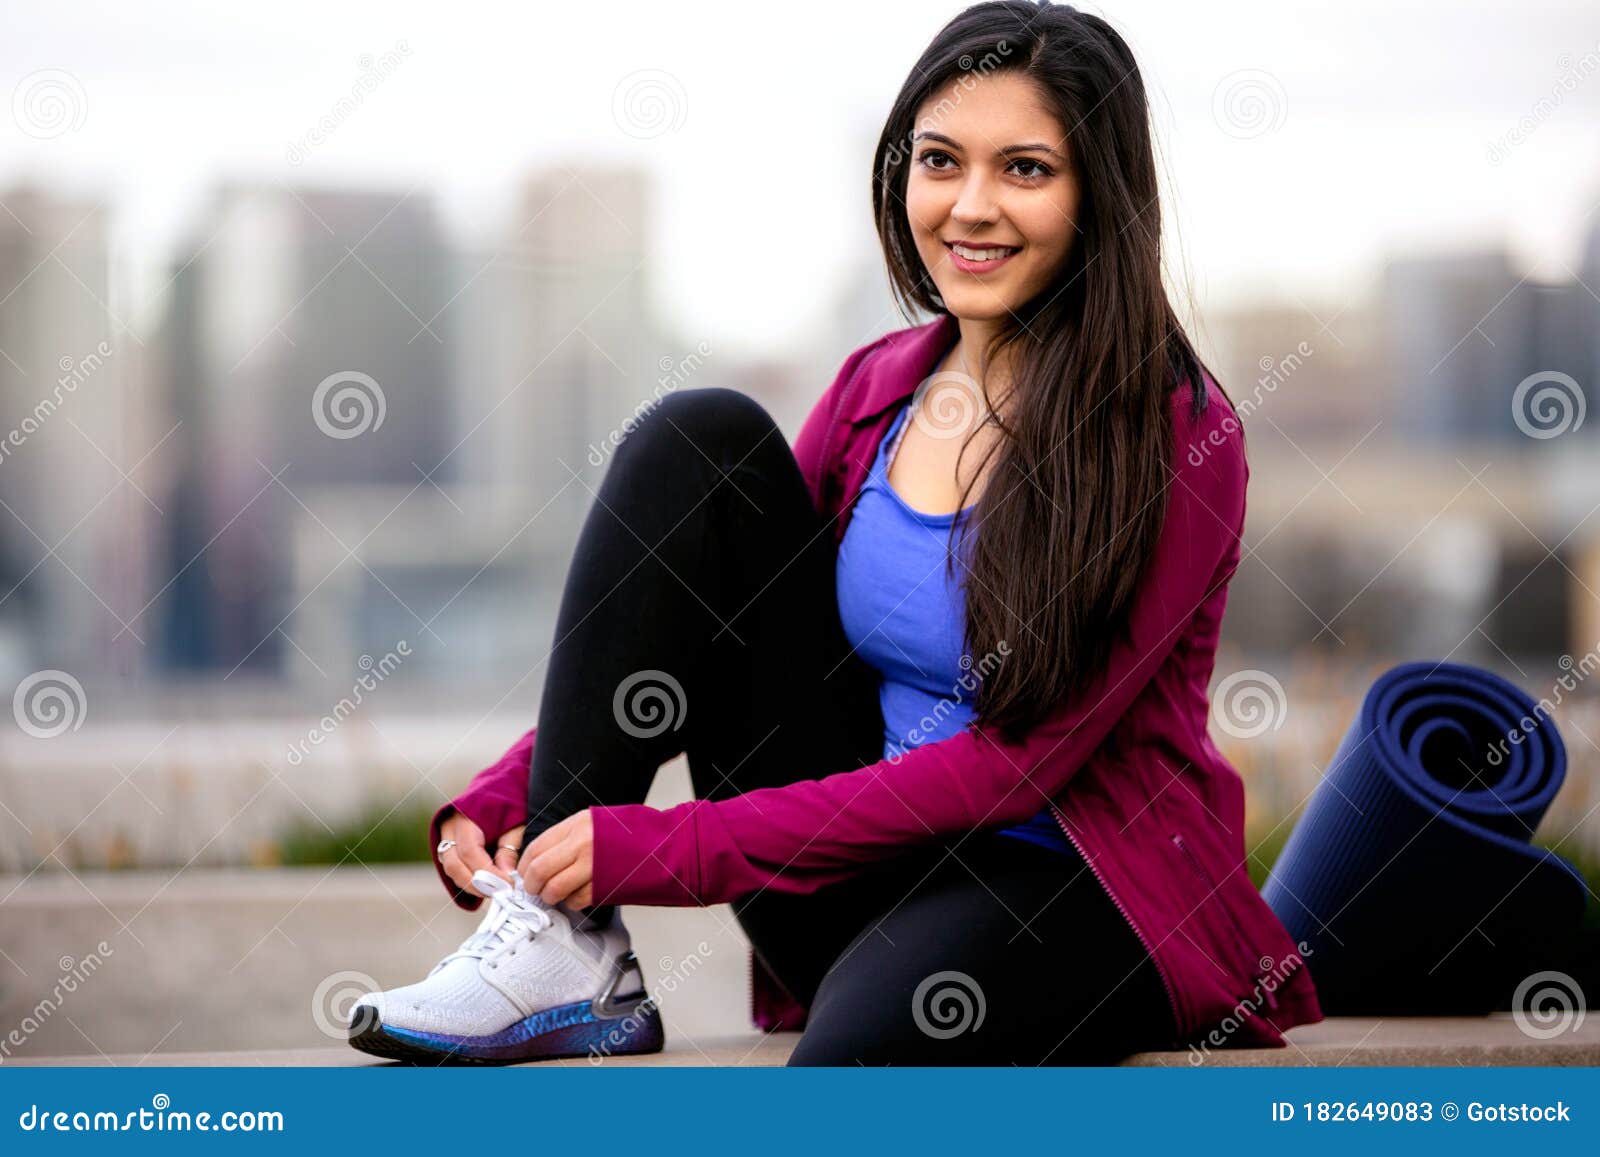 https://thumbs.dreamstime.com/z/casual-lifestyle-portrait-beautiful-indian-american-woman-relaxing-cardio-fitness-exercise-city-skyline-buildings-bac-182649083.jpg